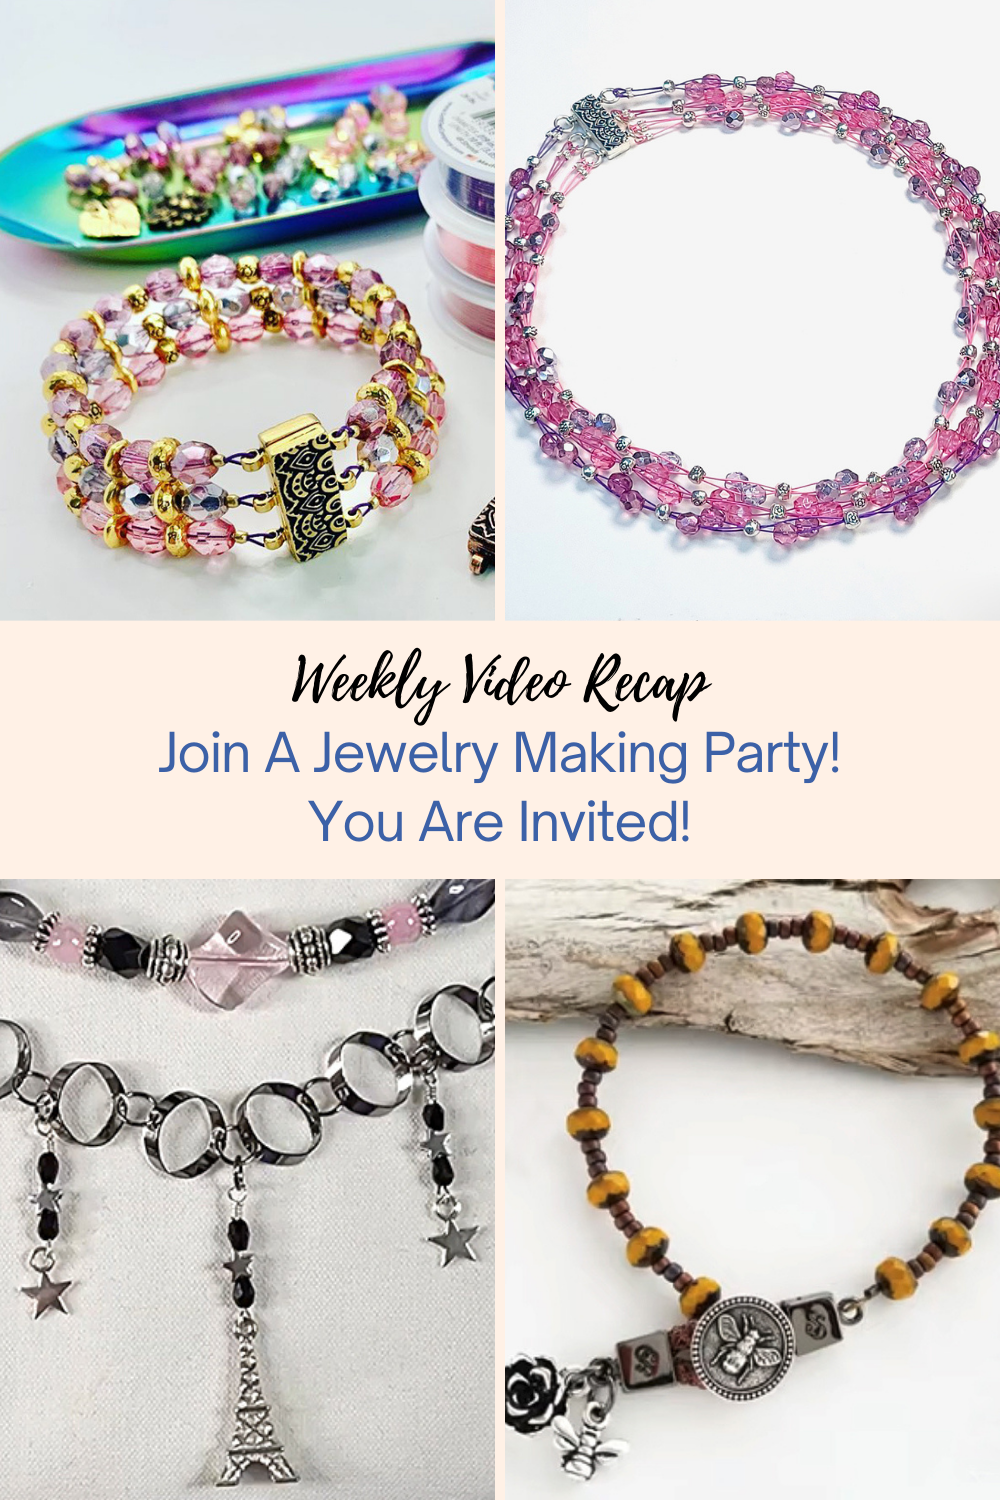 Join A Jewelry Making Party! You Are Invited! Collage